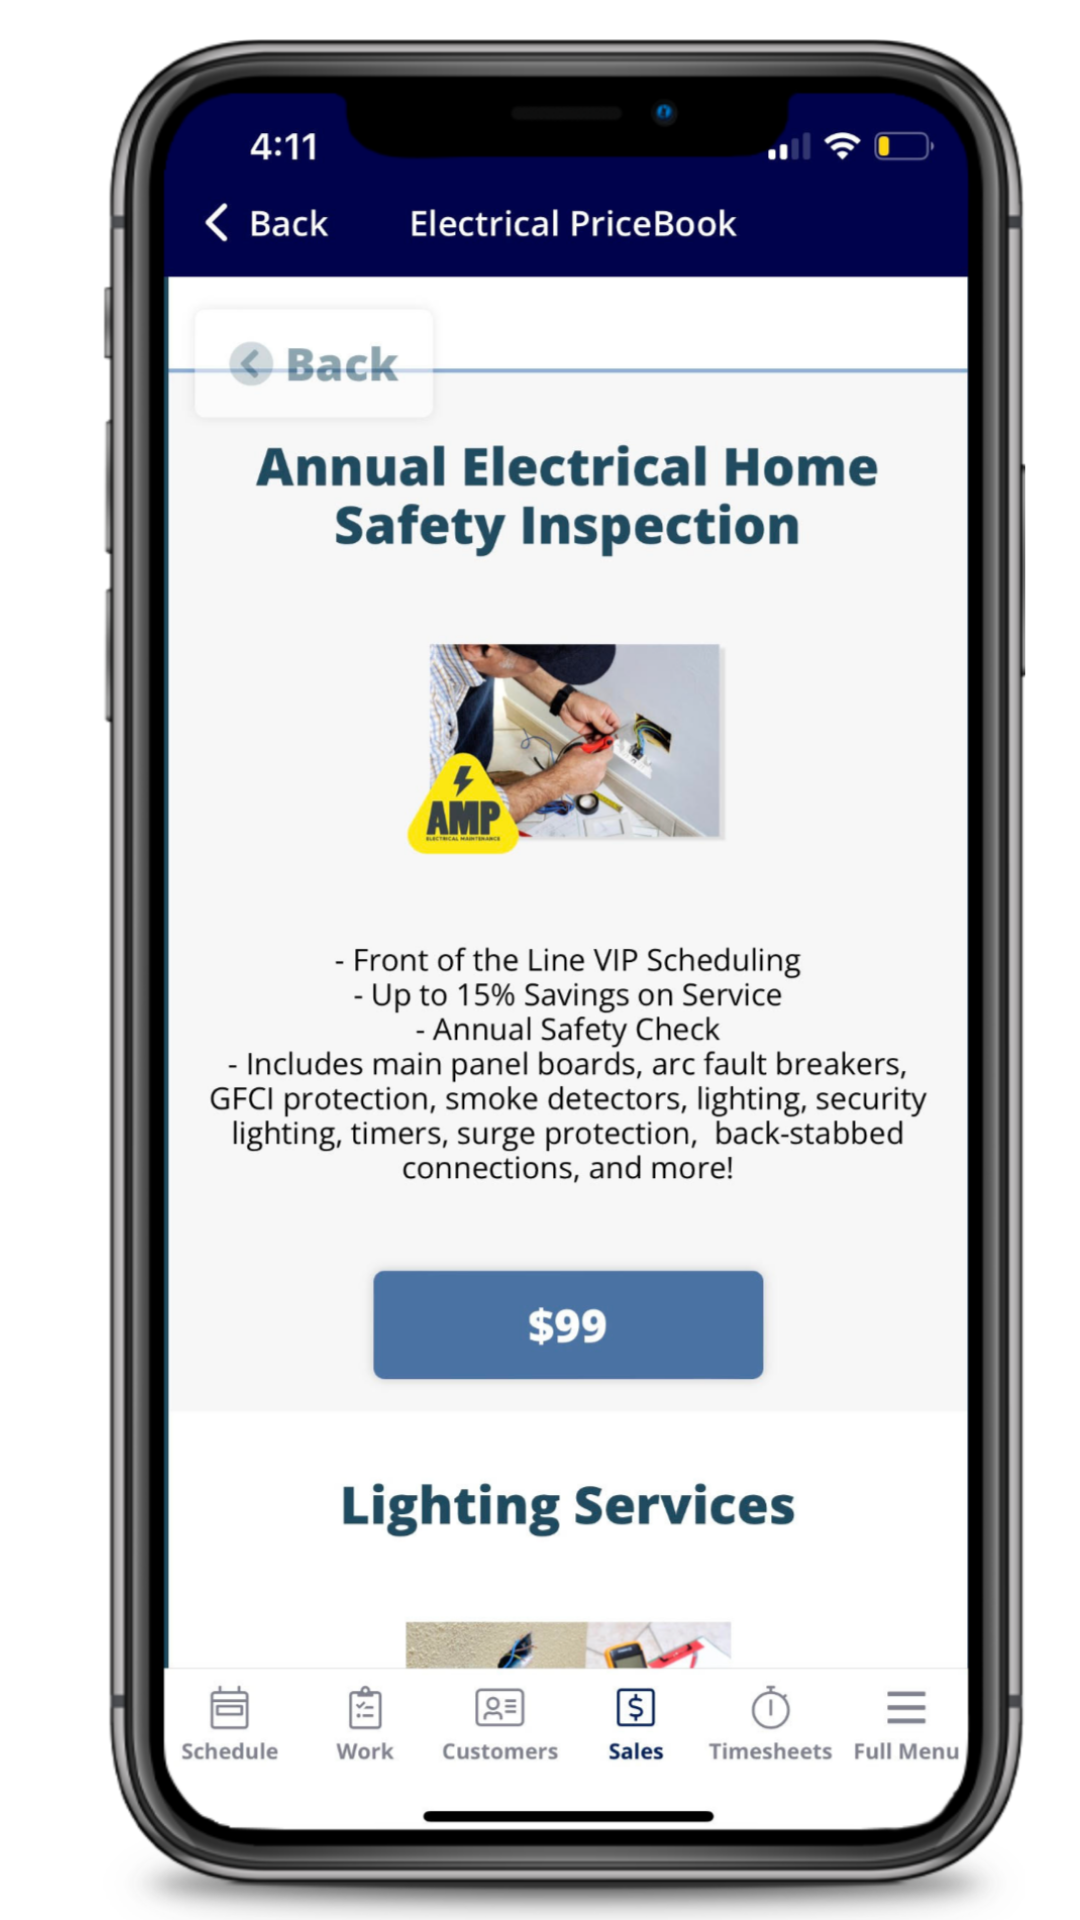 electrician software